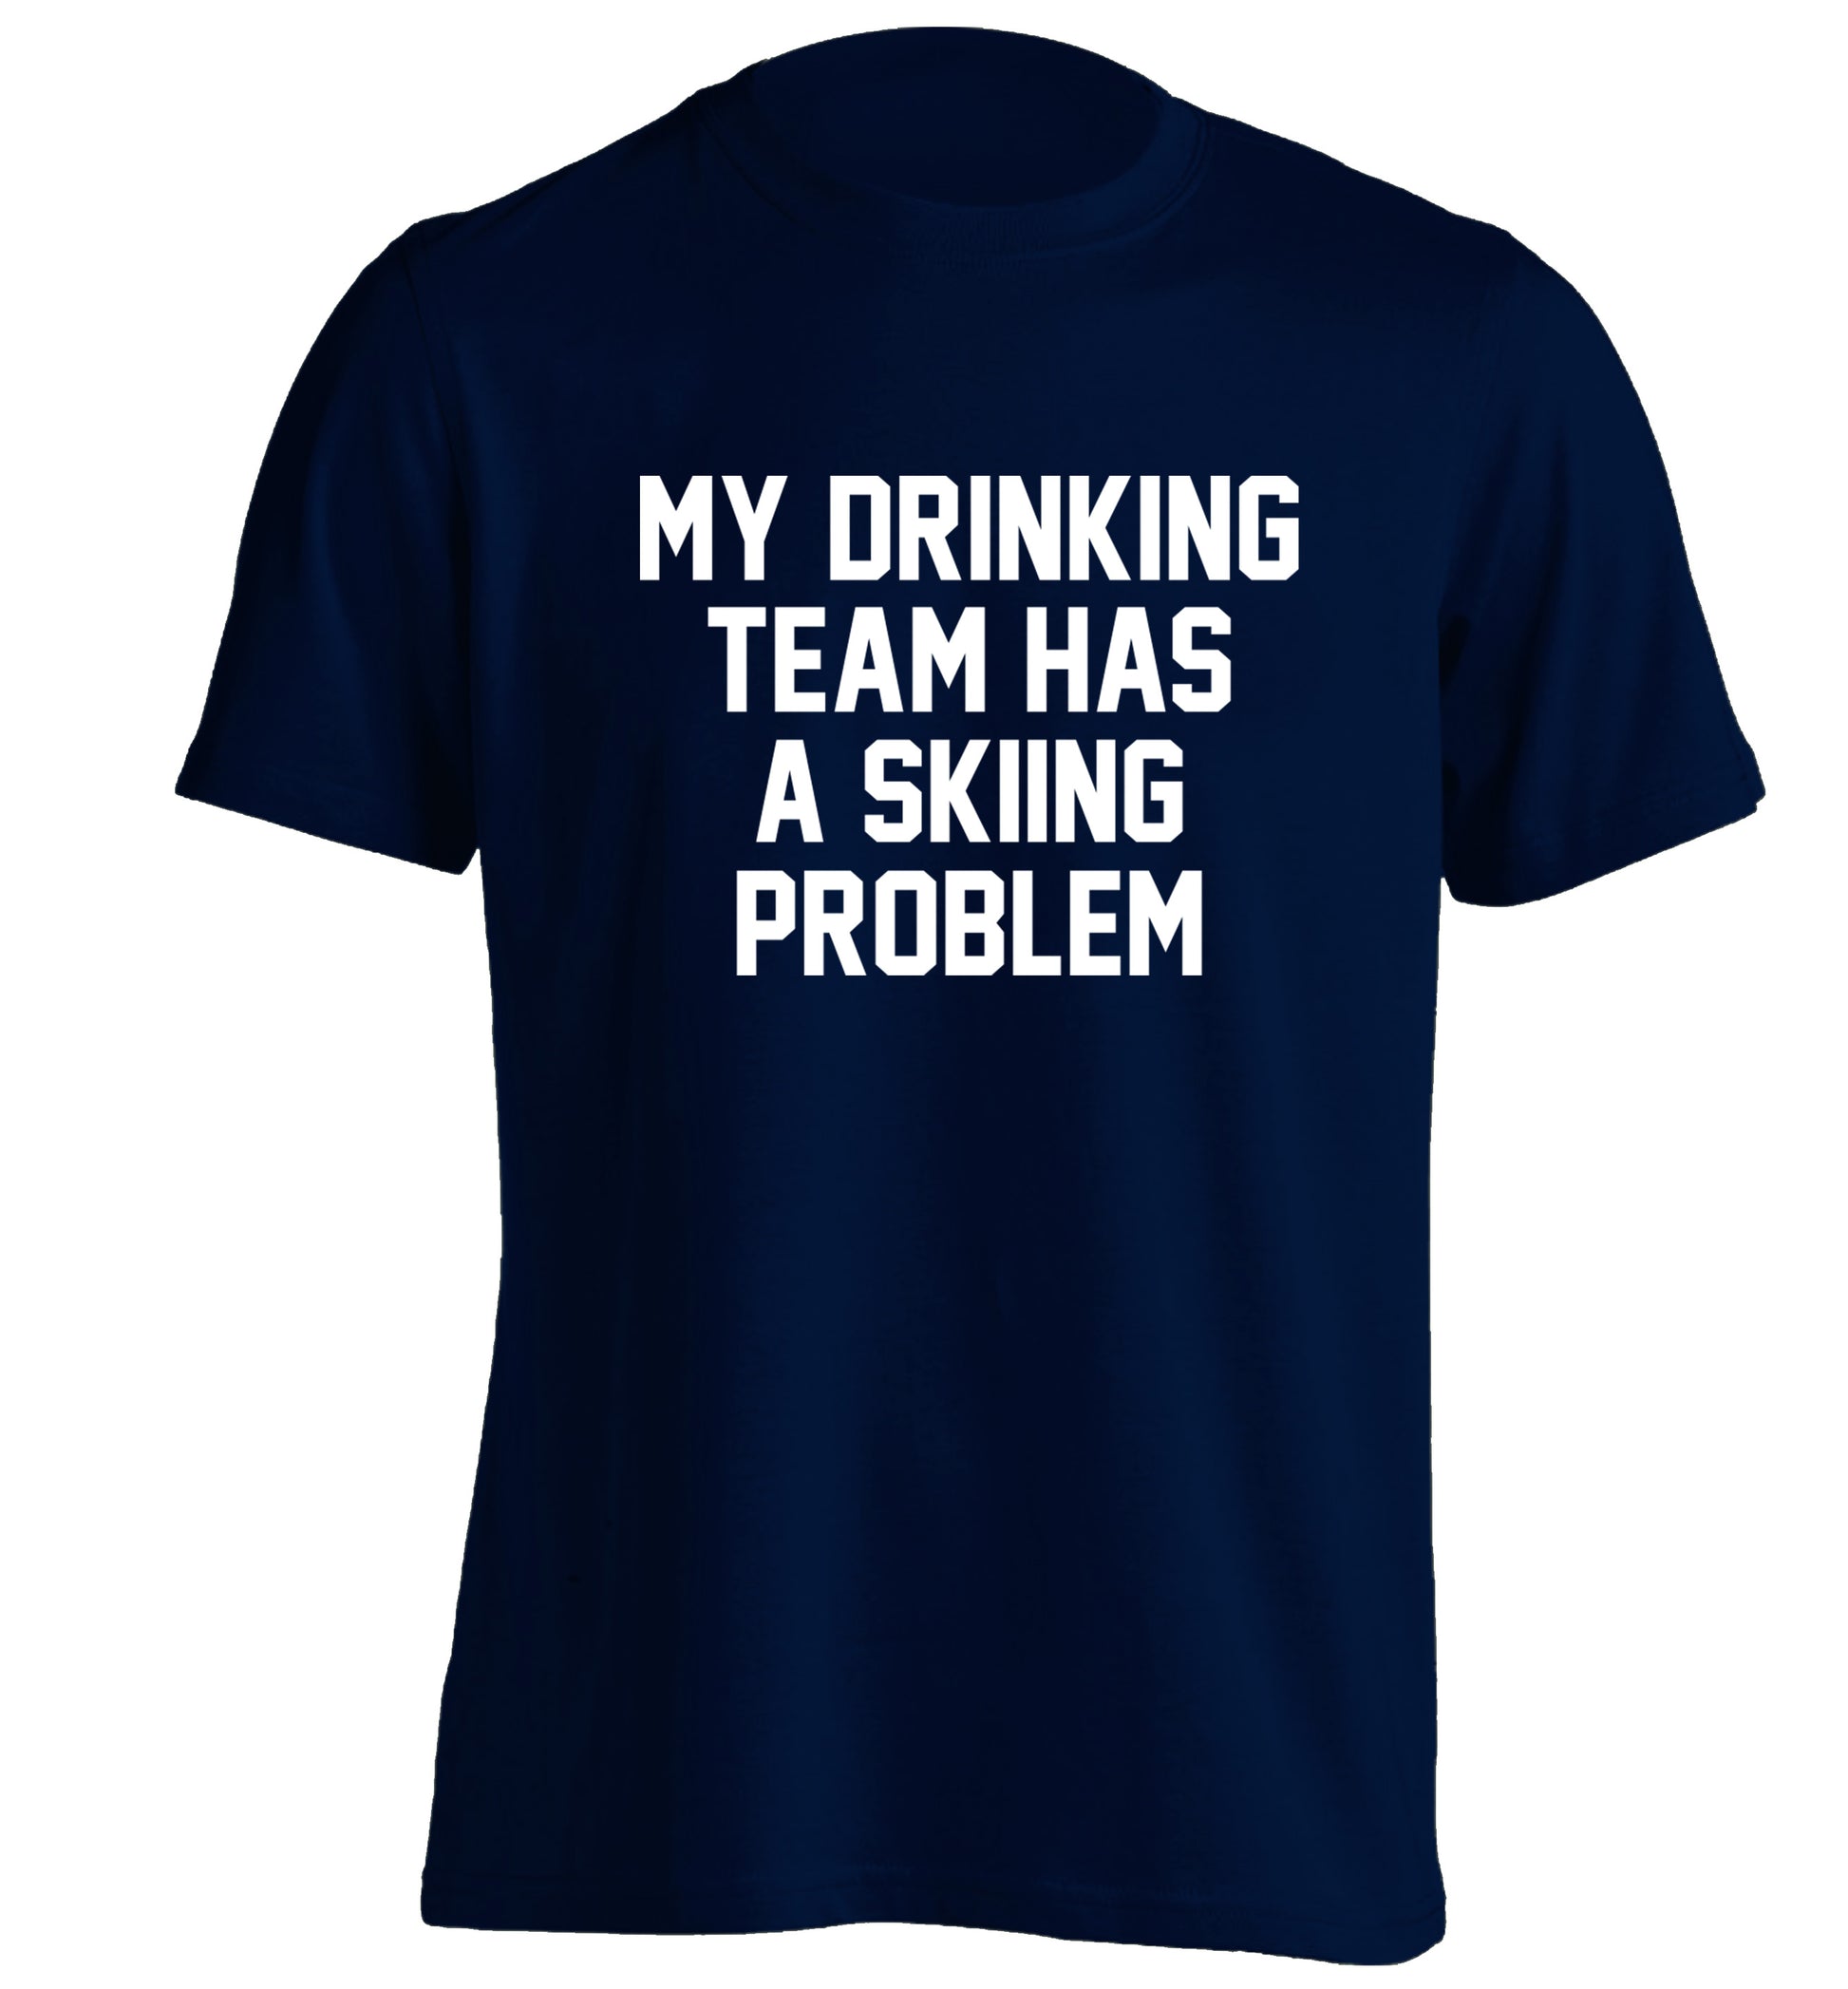 My drinking team has a skiing problem adults unisexnavy Tshirt 2XL